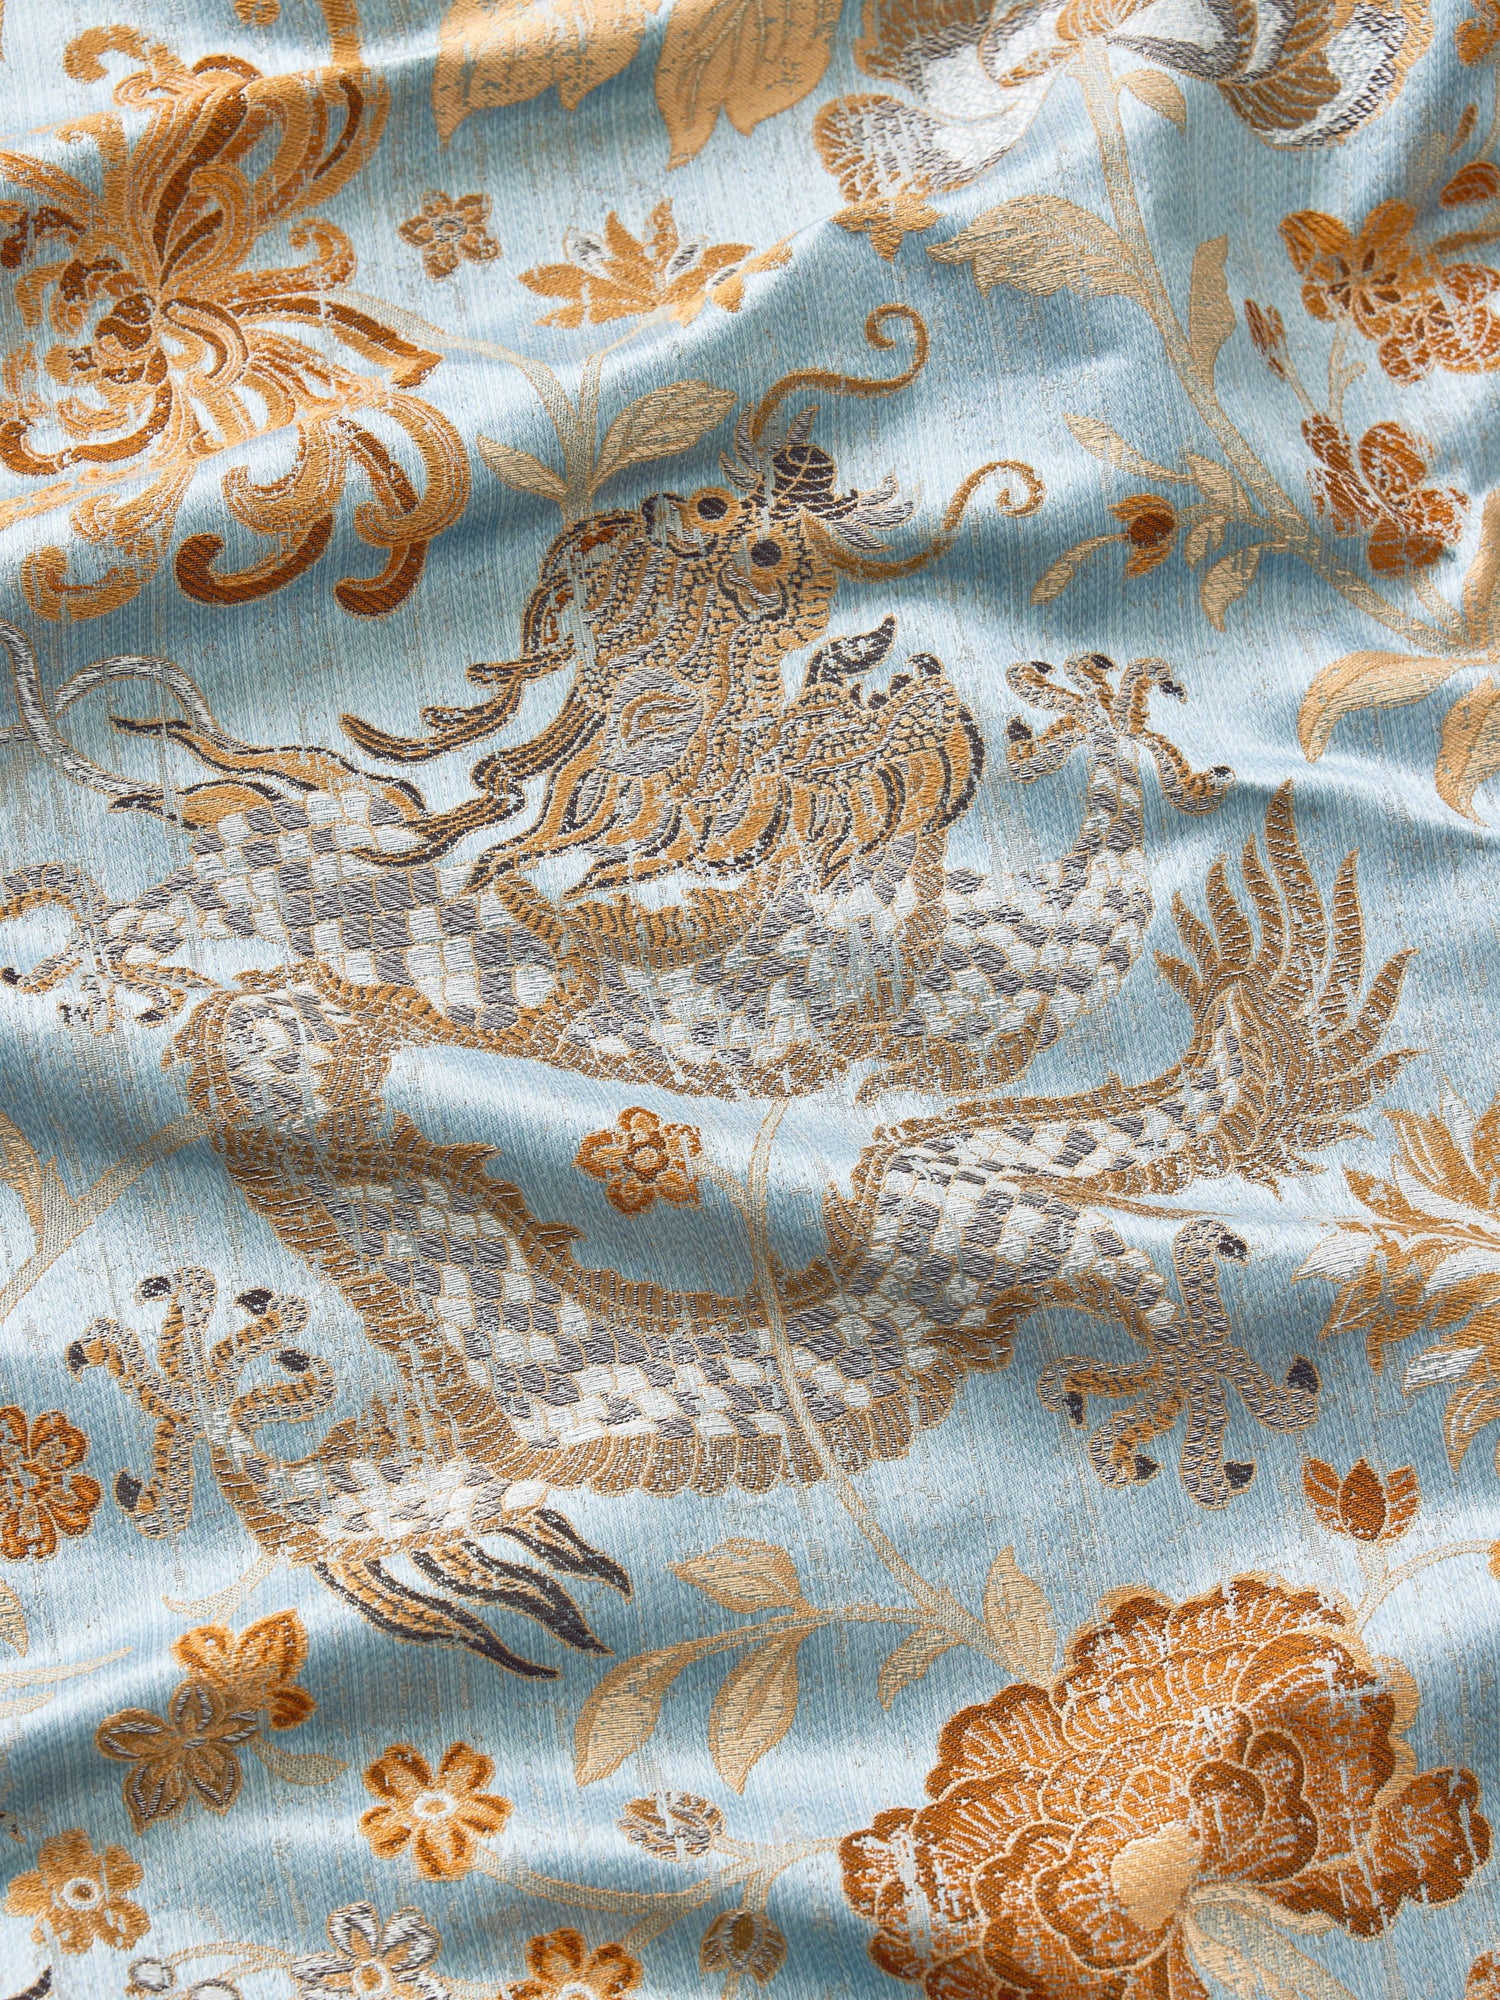 Dragon Tableau fabric in copper sky color - pattern number SC 000227327 - by Scalamandre in the Scalamandre Fabrics Book 1 collection